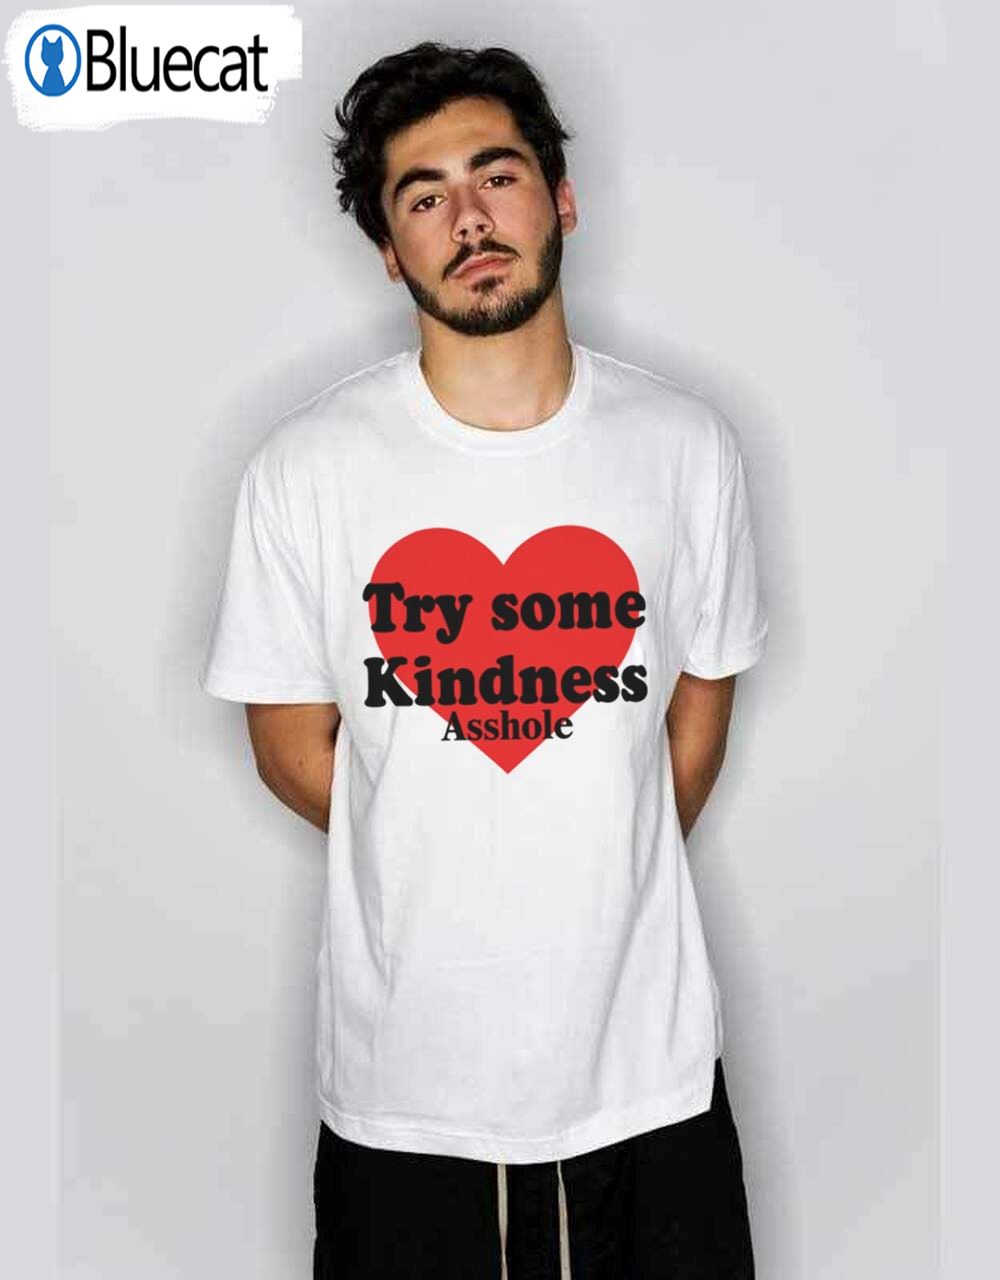 Try Some Kindness Asshole Shirt